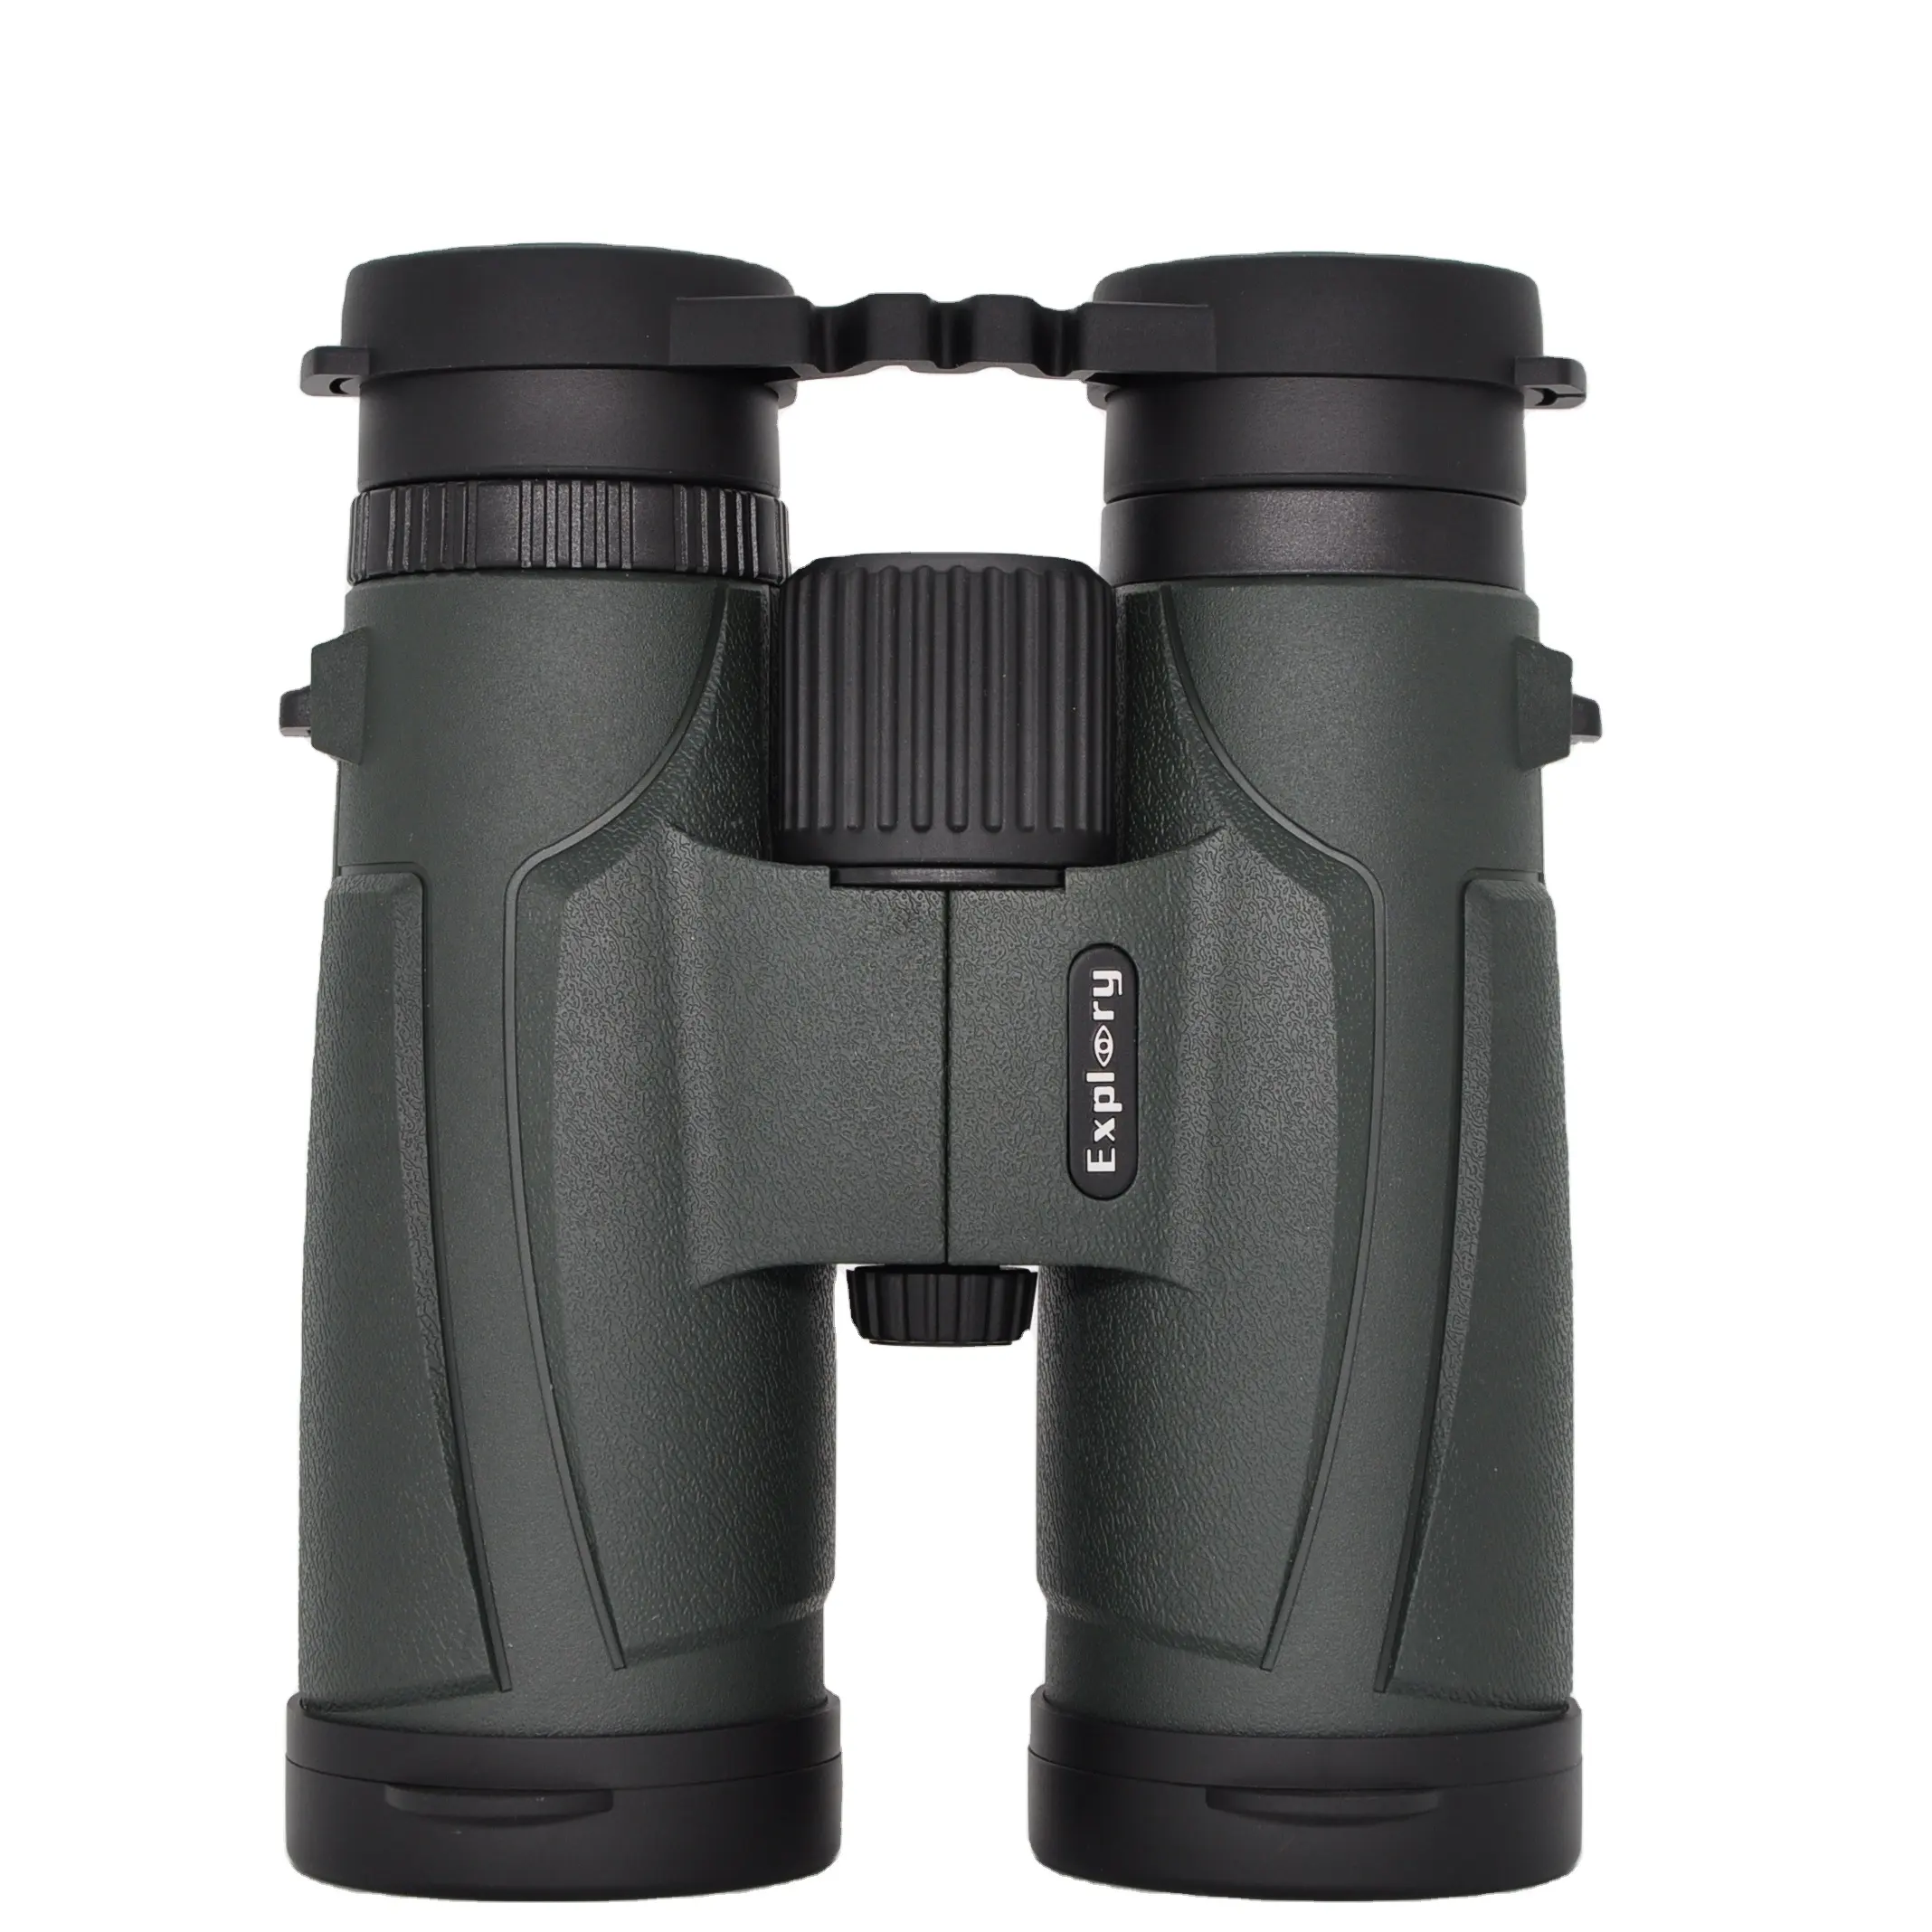 2021 high clear 10x42 outdoor sport must choose excellent quality roof waterproof with bak4 binoculars